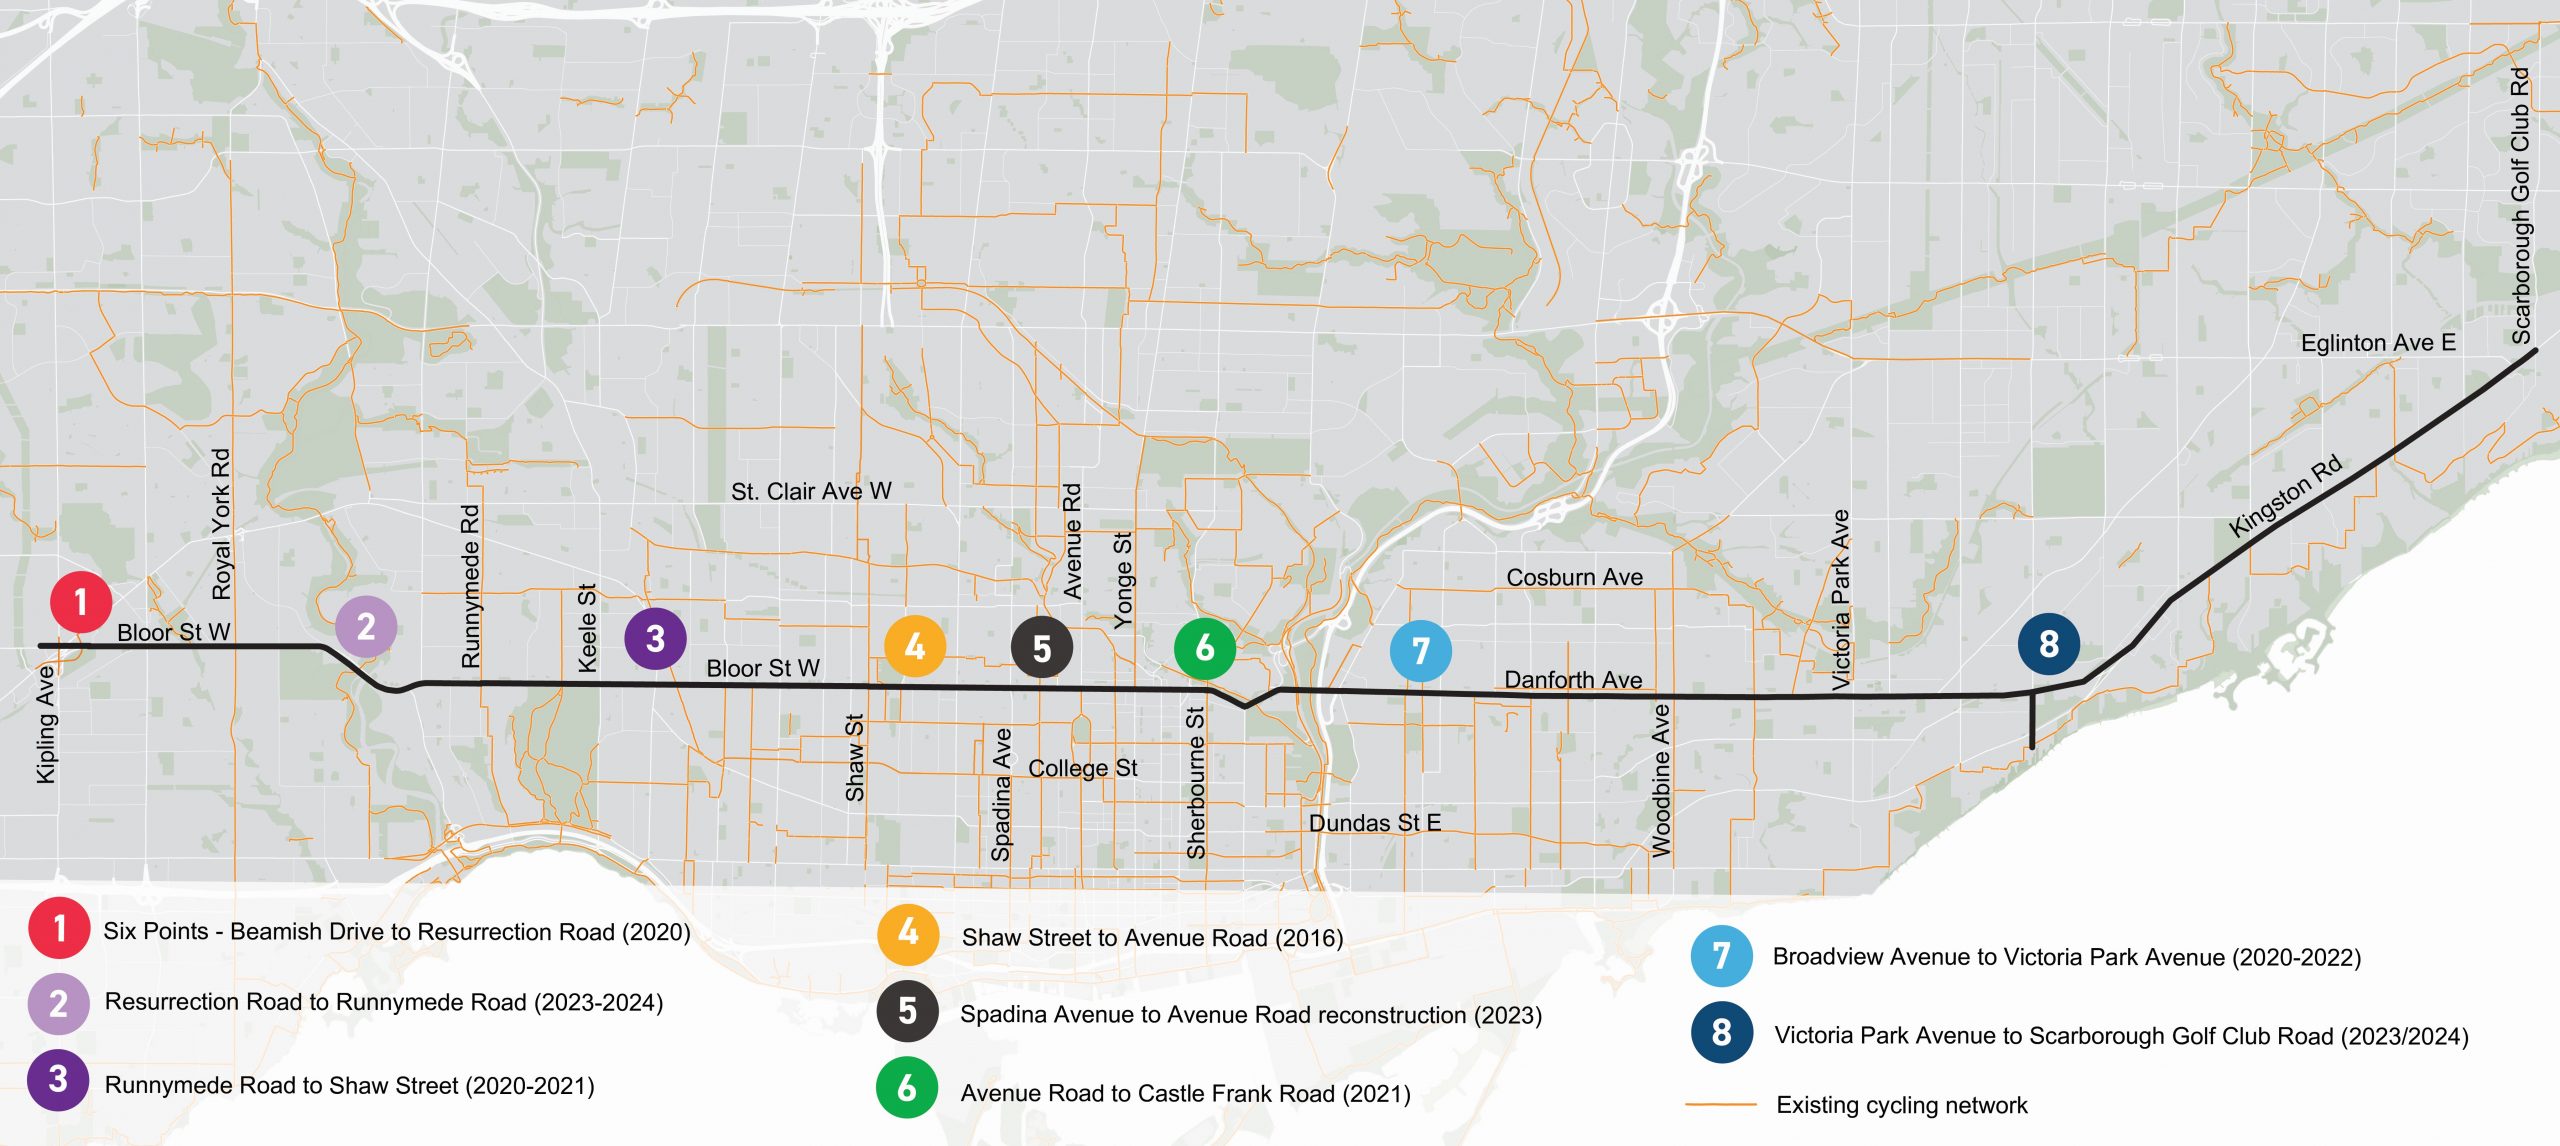 Map showing the existing and proposed phases of bikeways on Bloor Street, Danforth Avenue and Kingston Road, represented by a black line, with colour coordinated icons representing each phase.